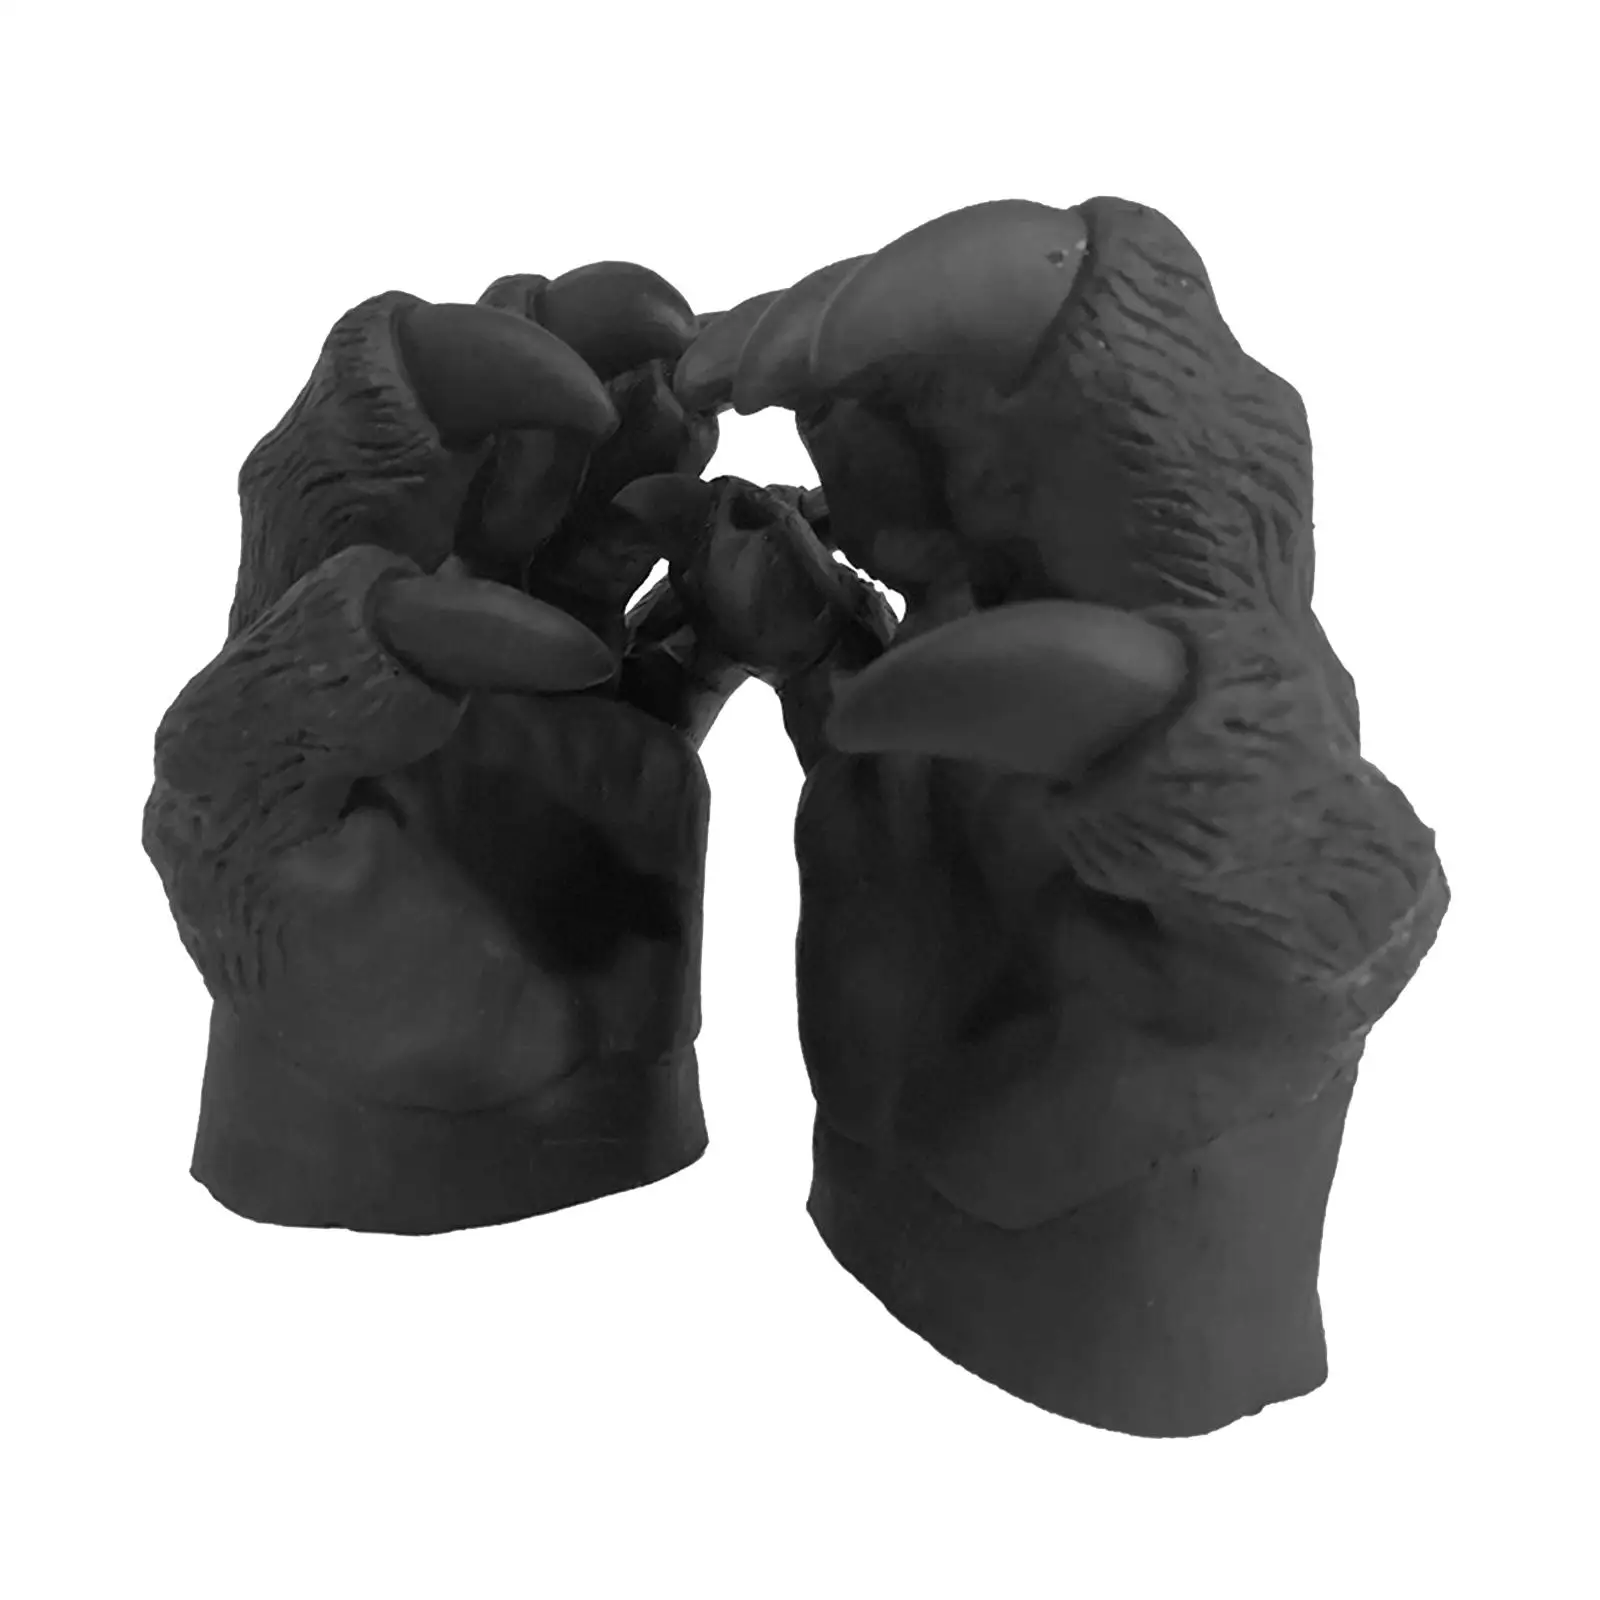 Halloween Black Bear Gloves Novelty Photography Props Soft Cosplay for Dance Shows Music Festivals Halloween Masquerade Teens